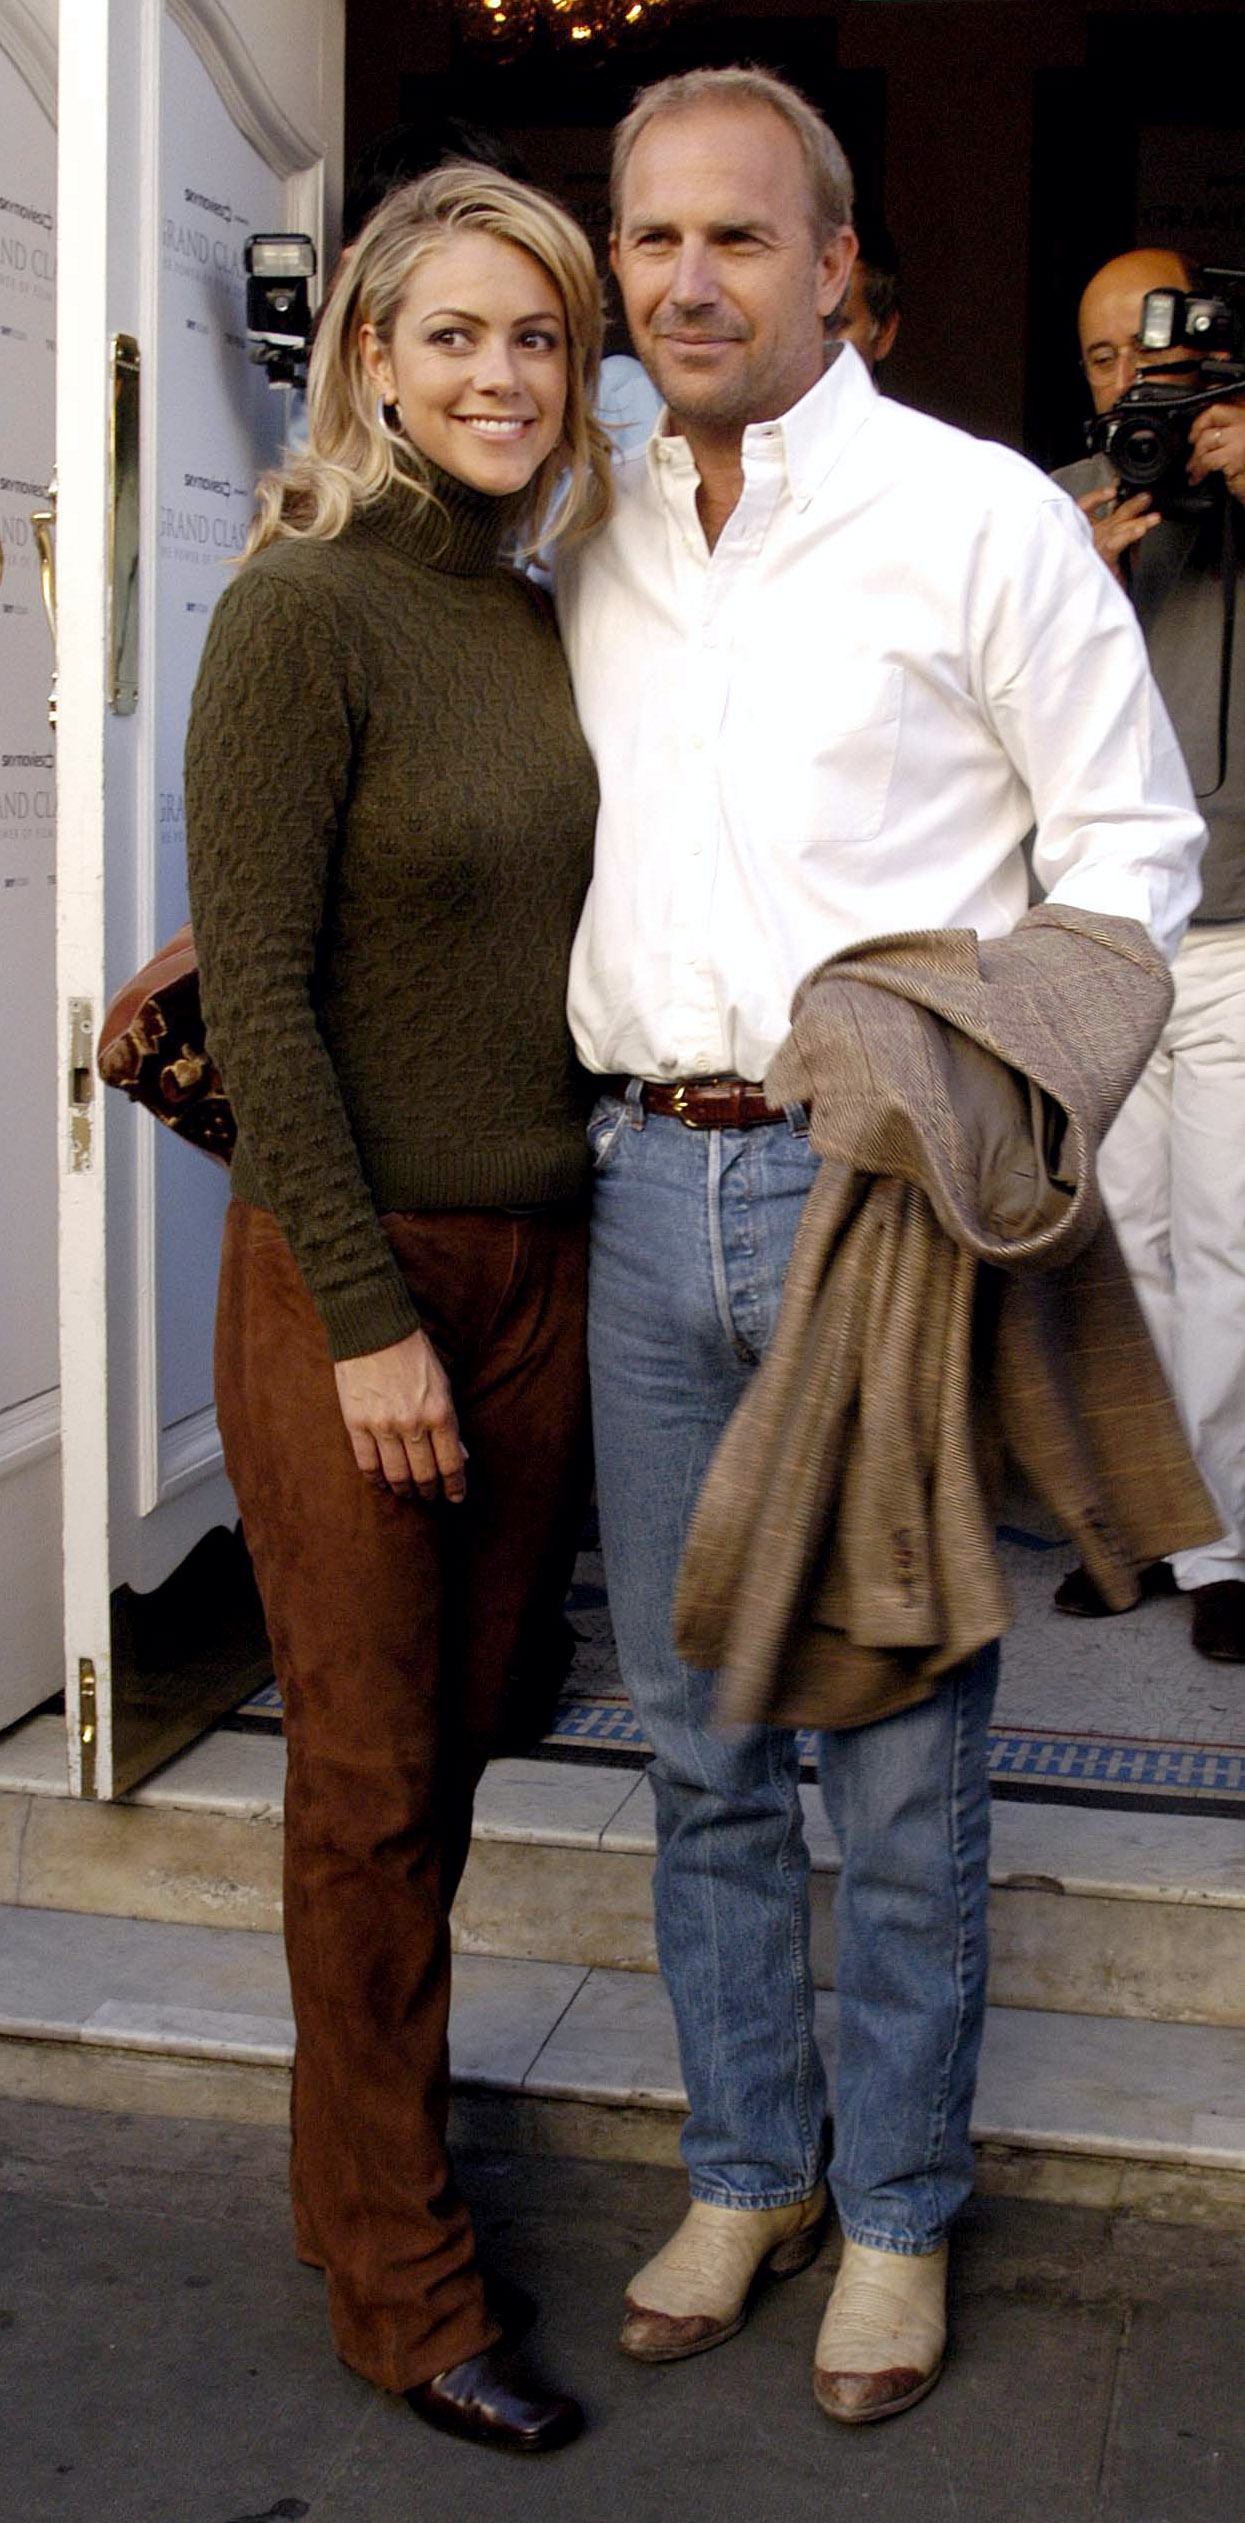 Christine Baumgartner and Kevin Costner at the screening of "Cool Hand Luke" at the Notting Hill Cinema in London on September 14, 2003 | Source: Getty Images